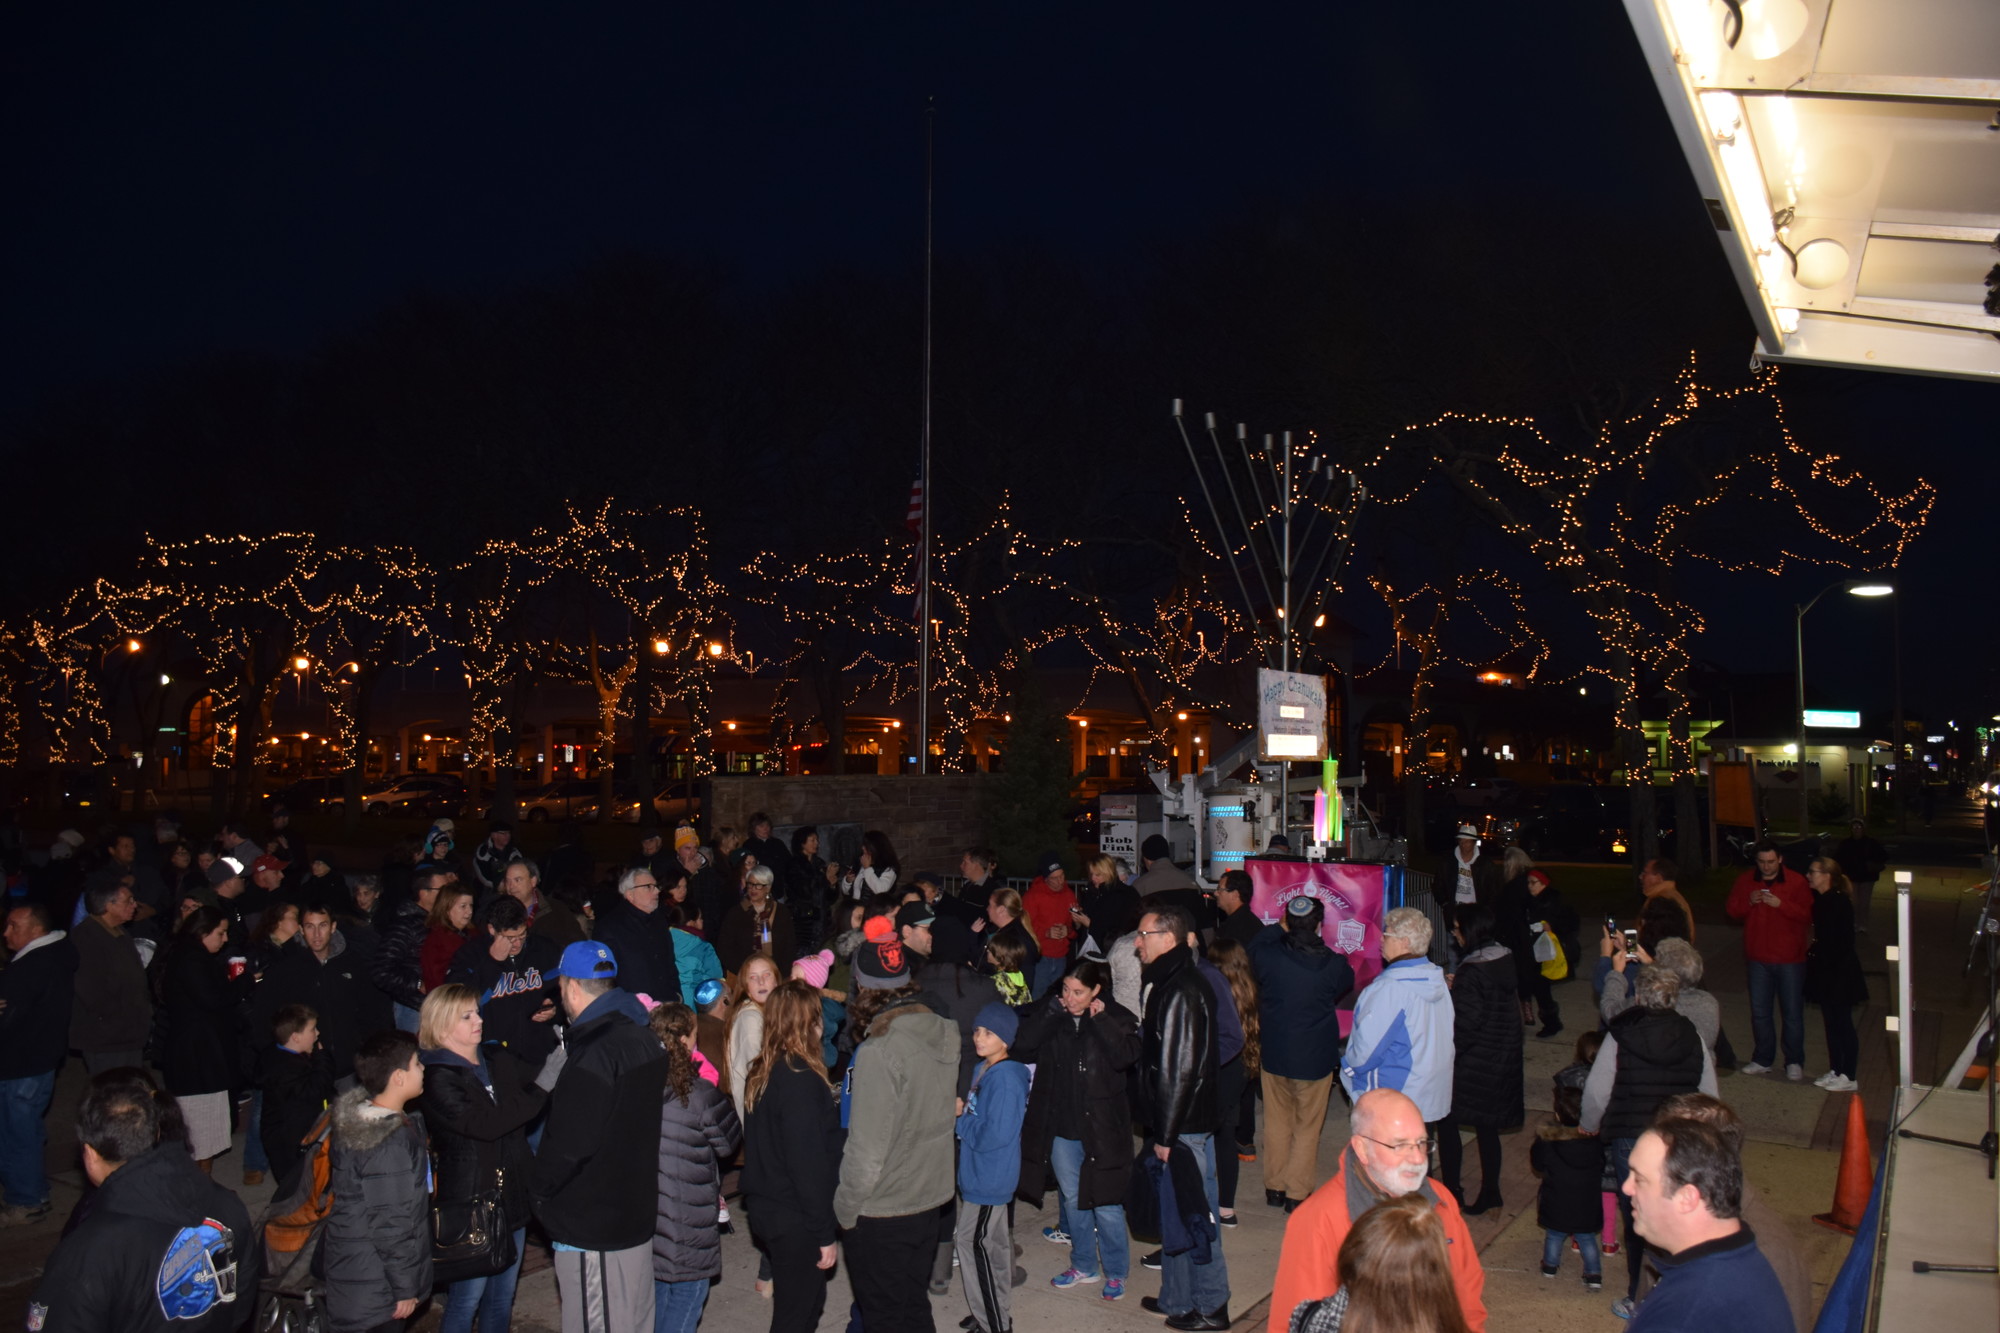 Turnout was at an all-time high for this year's menorah lighting.